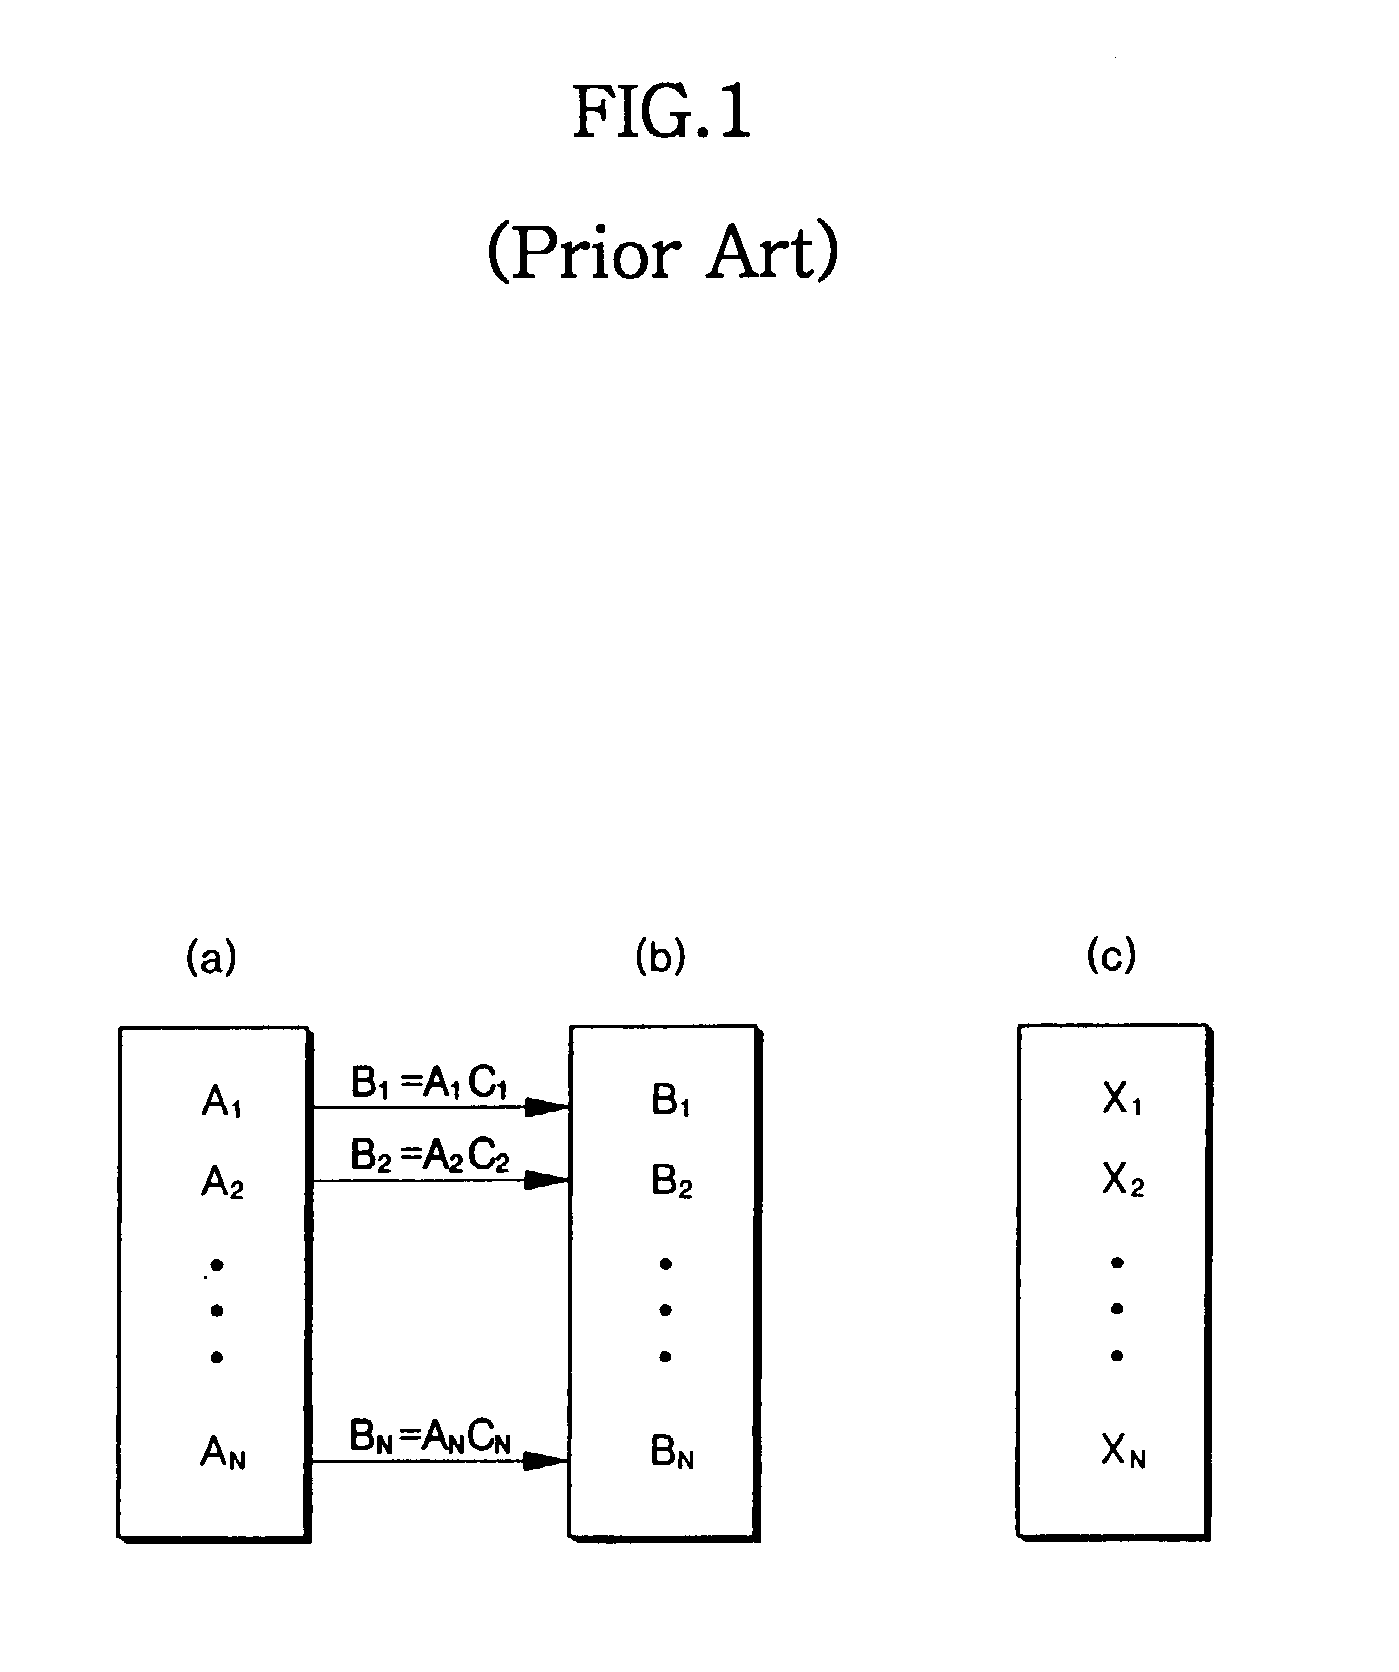 Method of determining training signal in OFDM, and apparatus and method for receiving OFDM signal using the training signal